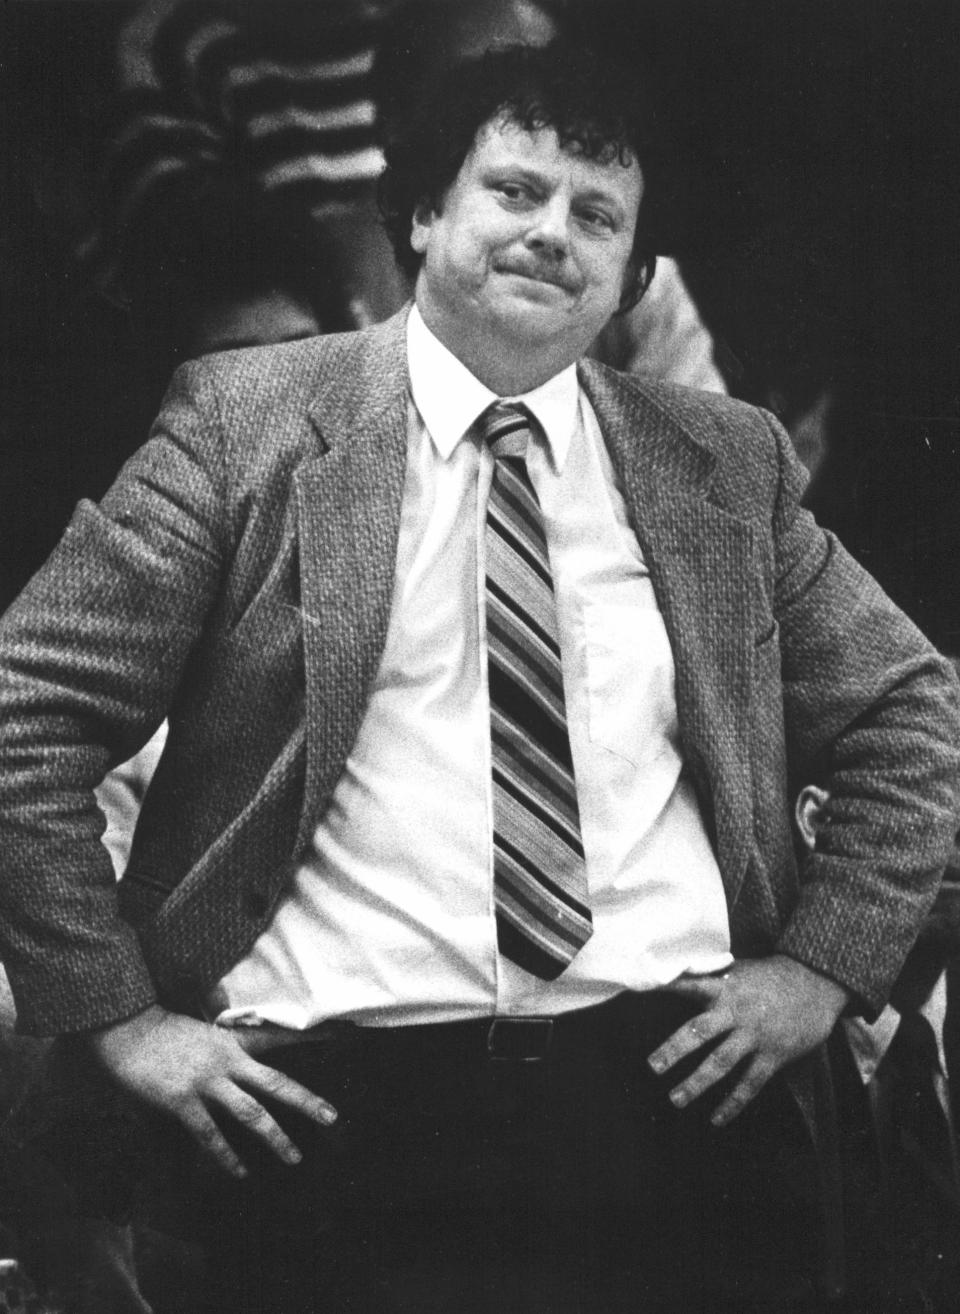 Jack McCarthy, shown coaching Belvidere in 1990, will be inducted into the Illinois Basketball Coaches Association Hall of Fame. He coached 15 years at Belvidere and six at South Beloit. Peter Scalia, South Beloit's all-time leading scorer, will also be inducted.